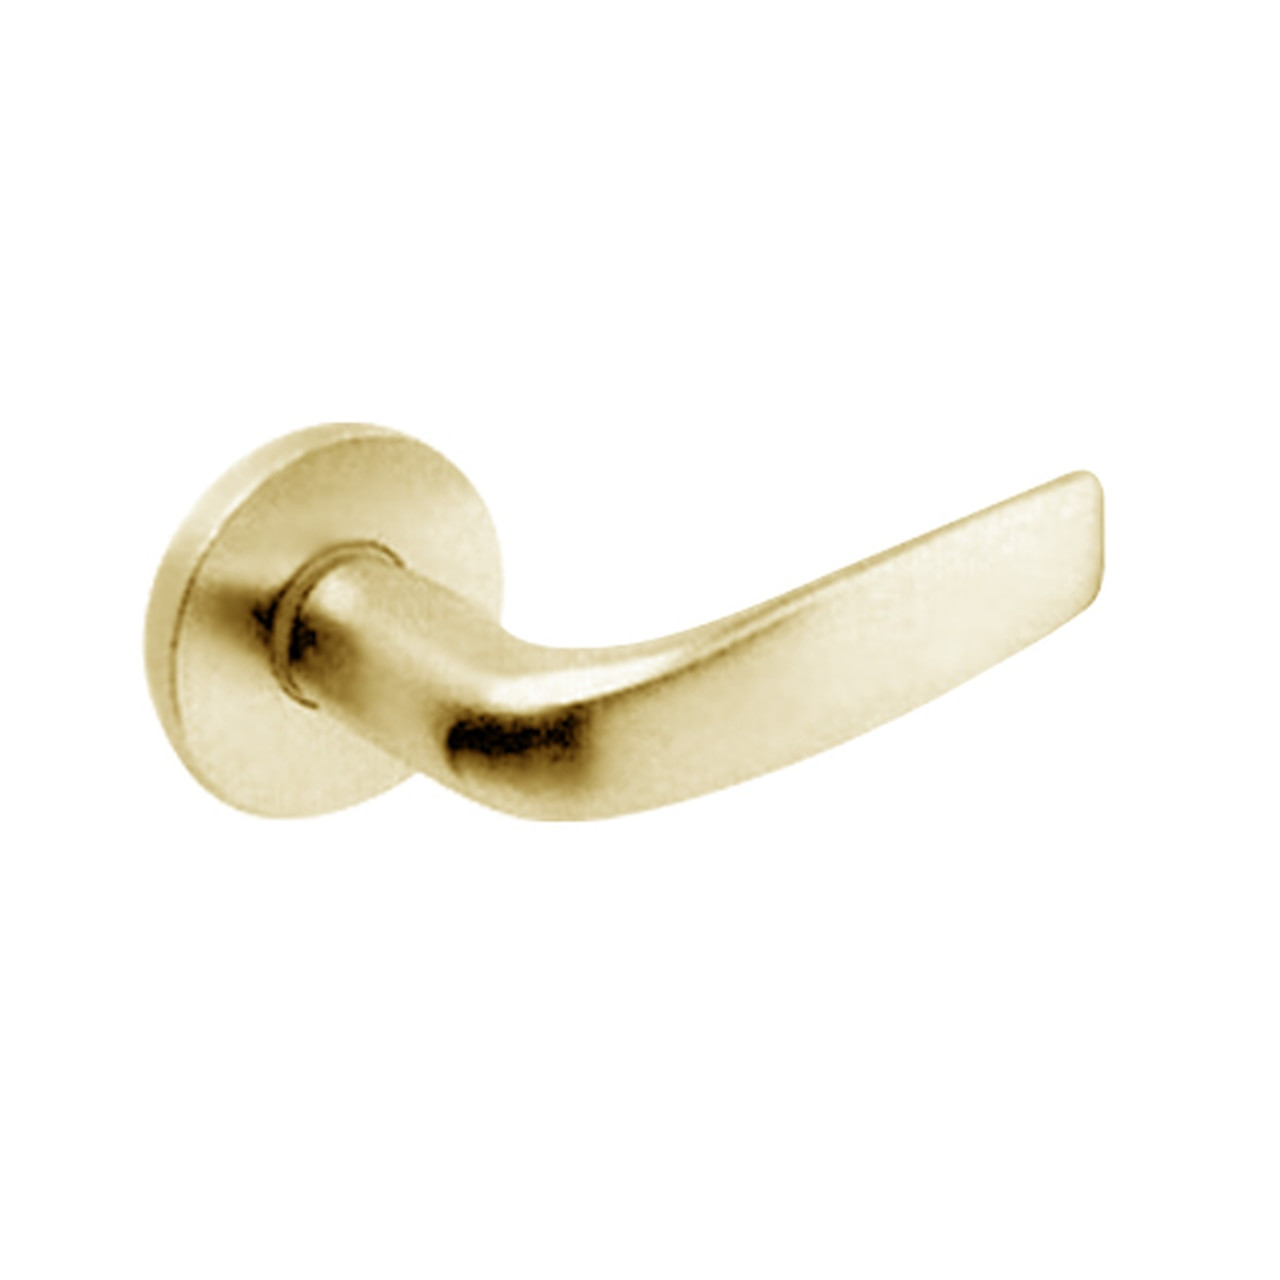 ML2053-CSA-605-M31 Corbin Russwin ML2000 Series Mortise Entrance Trim Pack with Citation Lever in Bright Brass